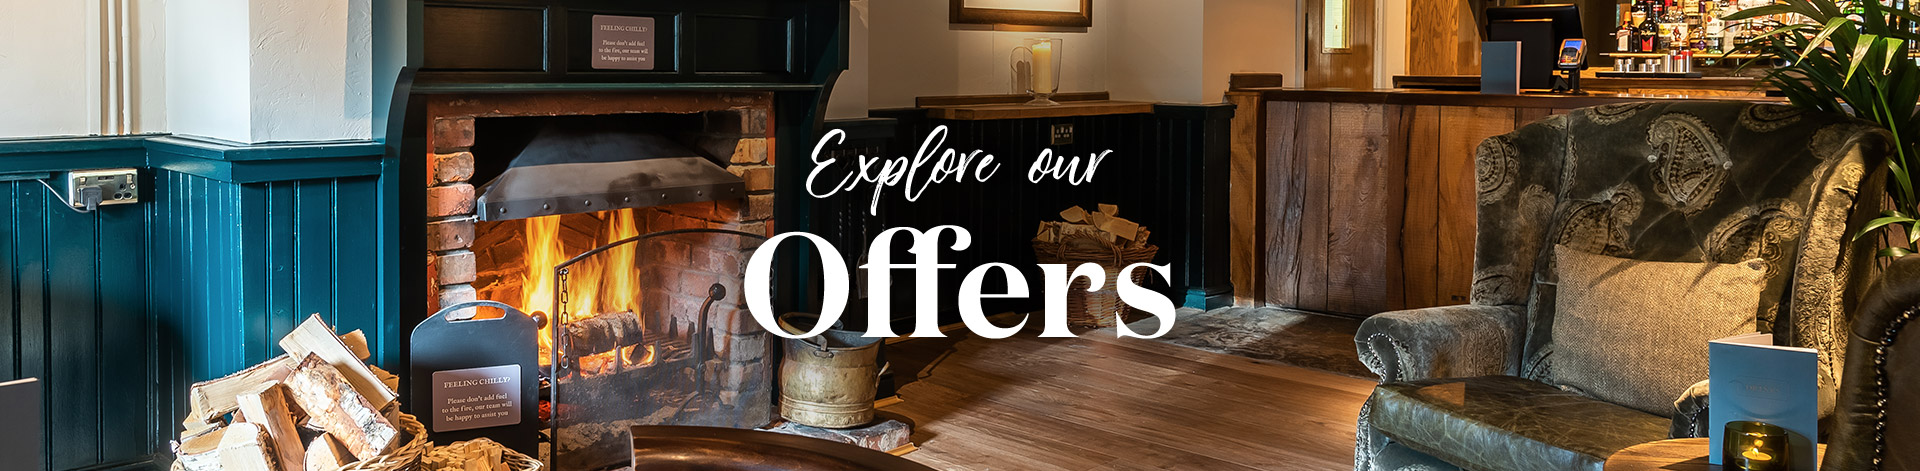 Our latest offers at The Fox